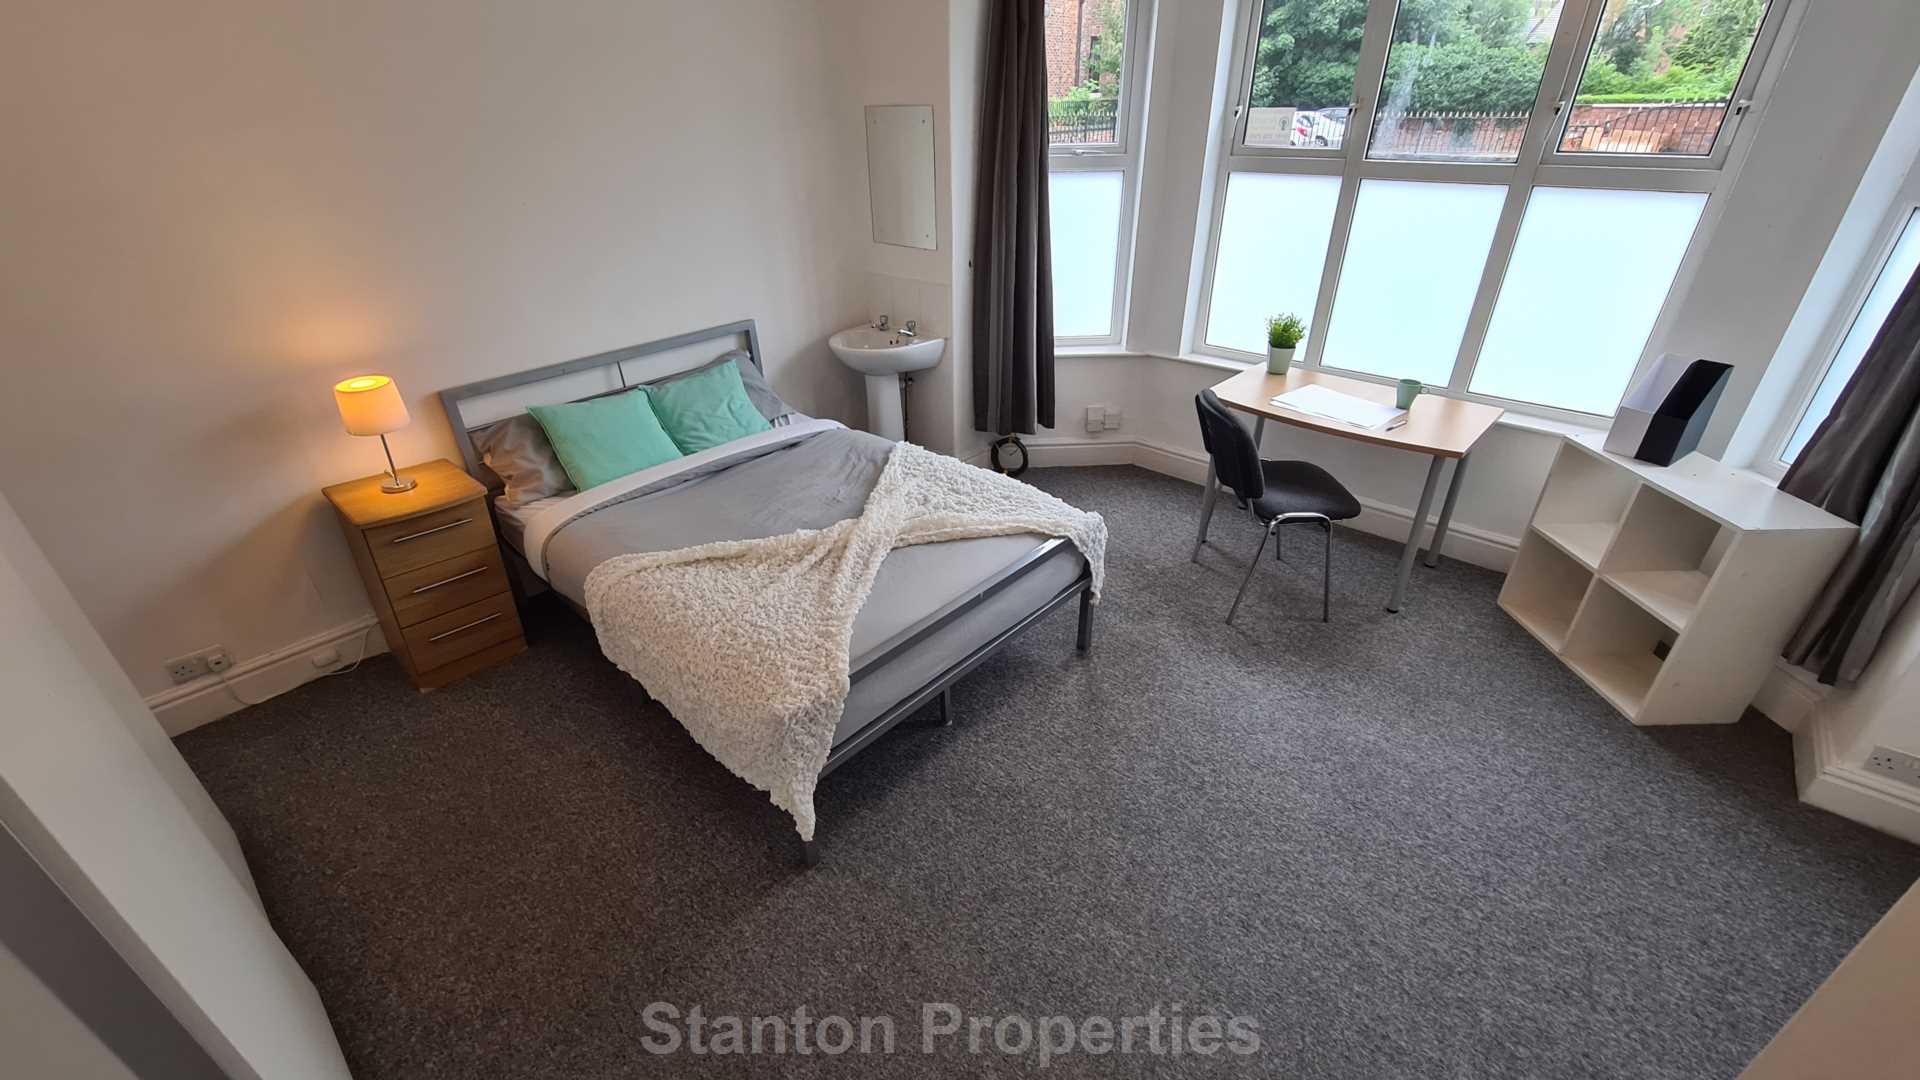 £145 pppw, See Video Tour, Wellington Road, Fallowfield, Image 17